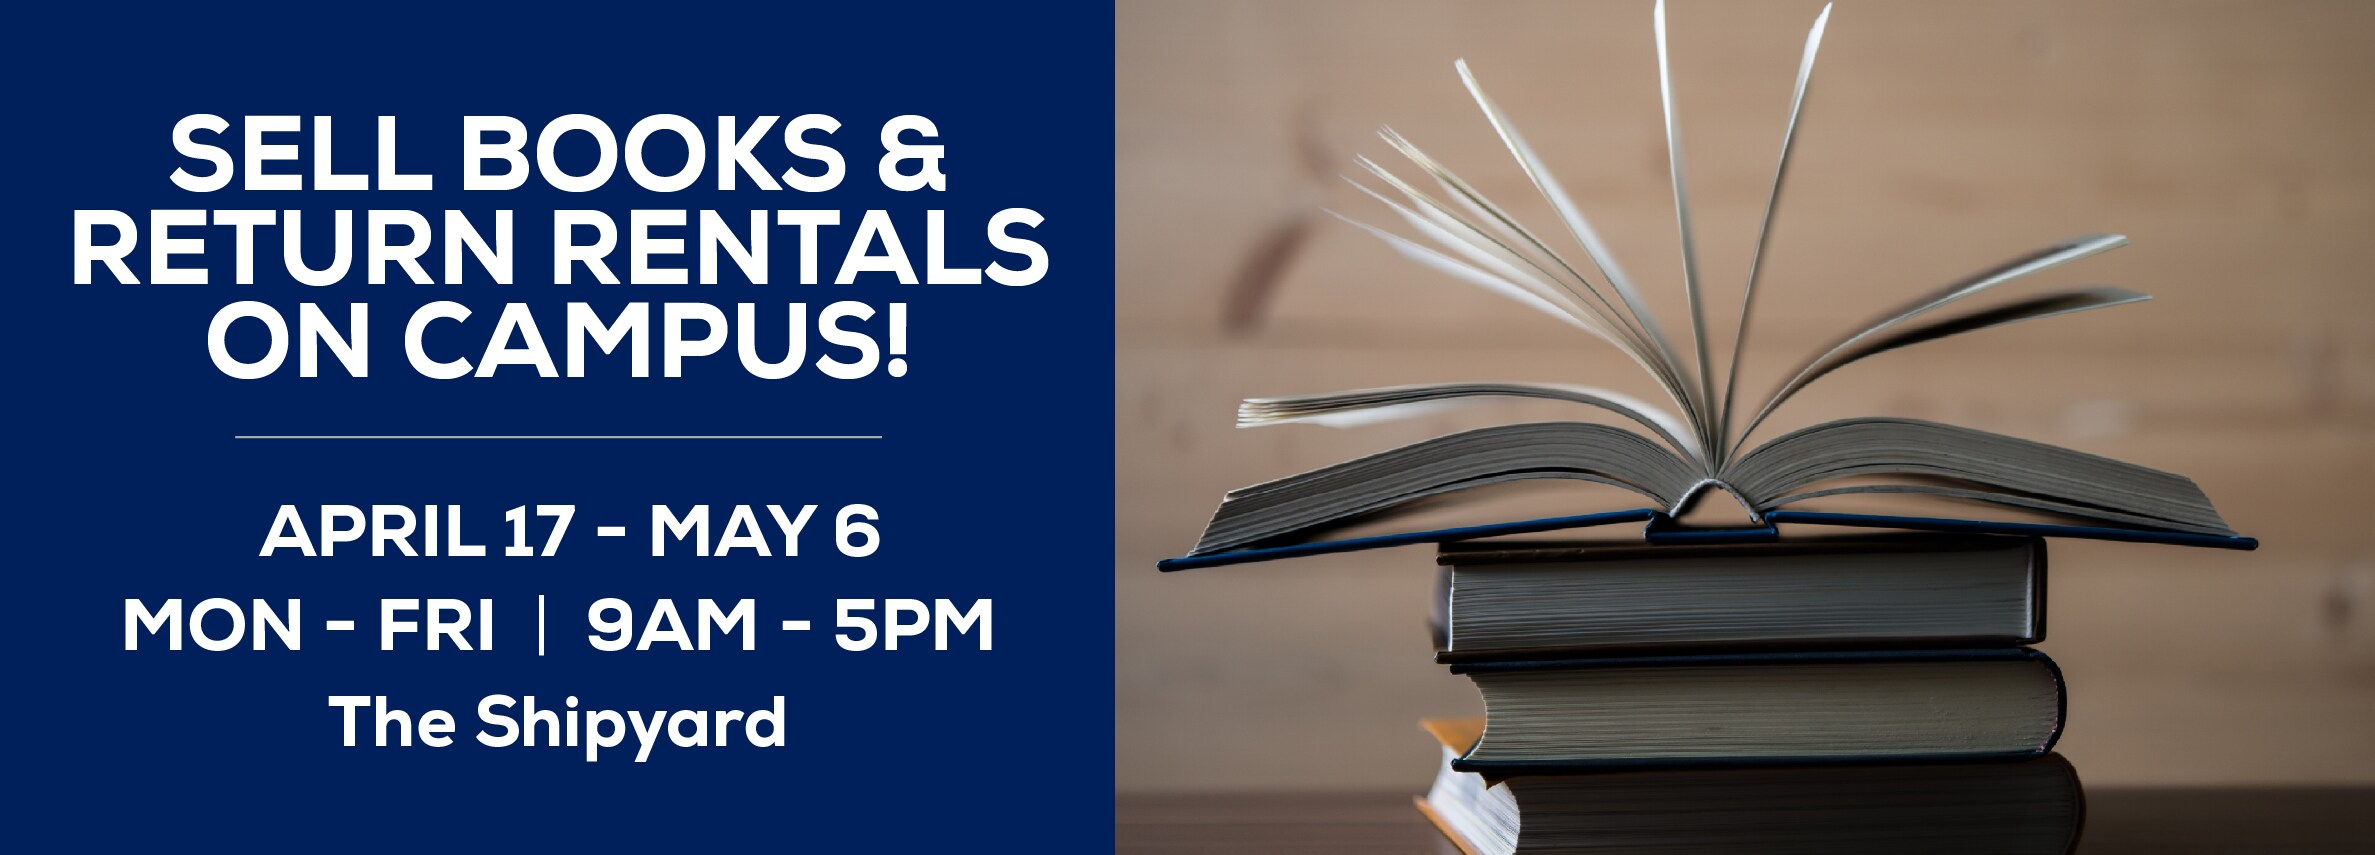 Sell Books & Return Rentals On Campus! April 17 - May 6 from 9AM to 5PM. Located at The Shipyard